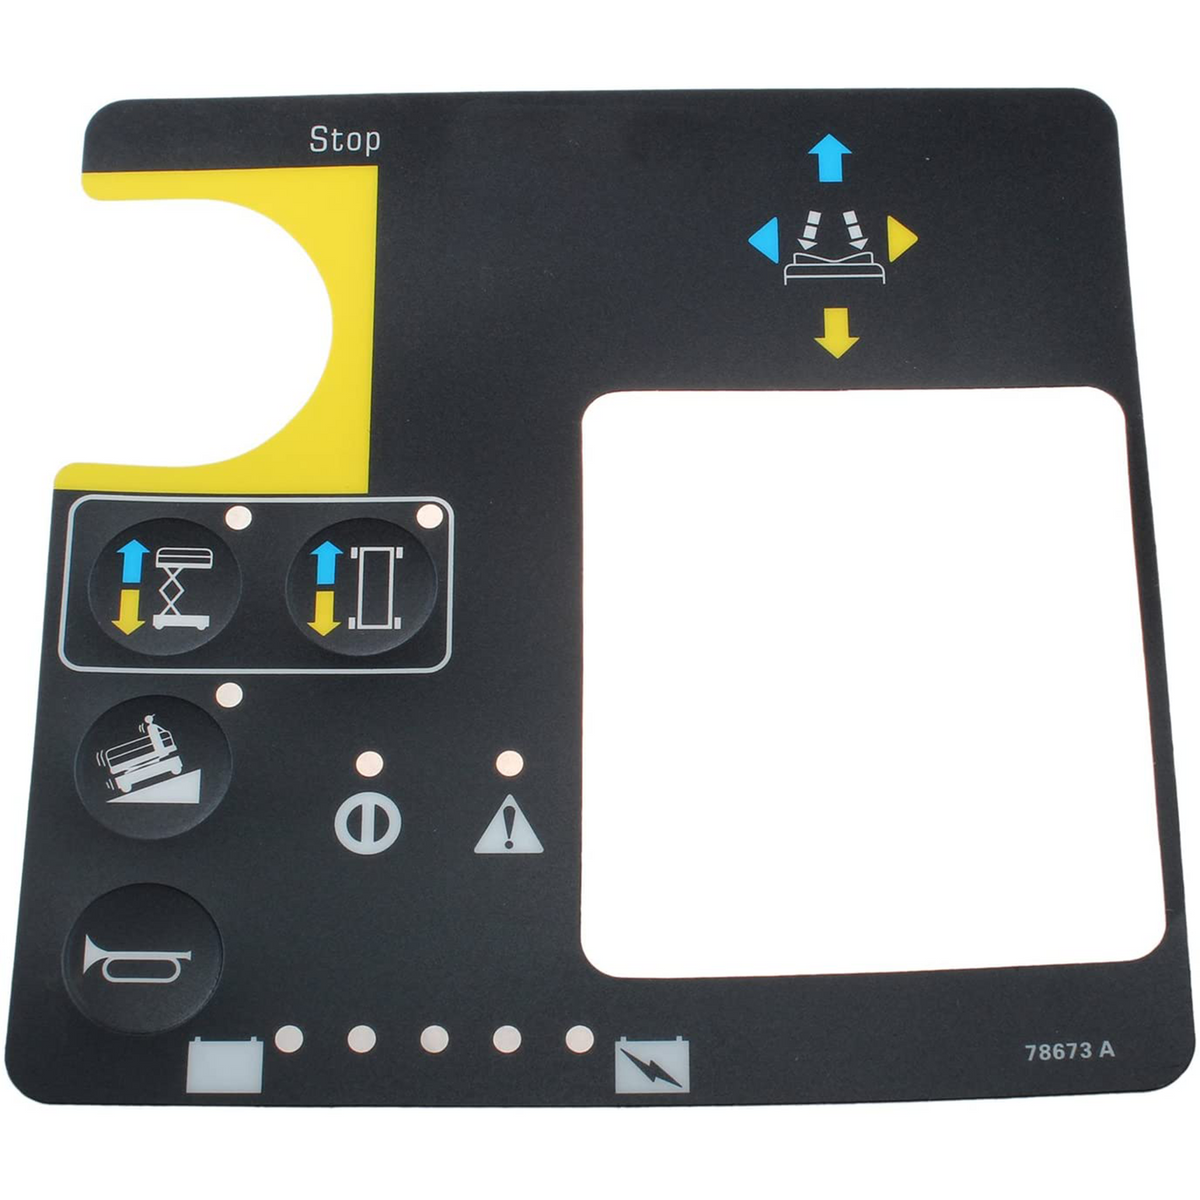 Gen 4 Play Control Box Overlay Decal 78673 78673A 78673GT for Genie GS-1530 GS-1930 GS-2032 GS-2046 GS-2632 GS-2646 GS-2668 GS-3268 - KUDUPARTS